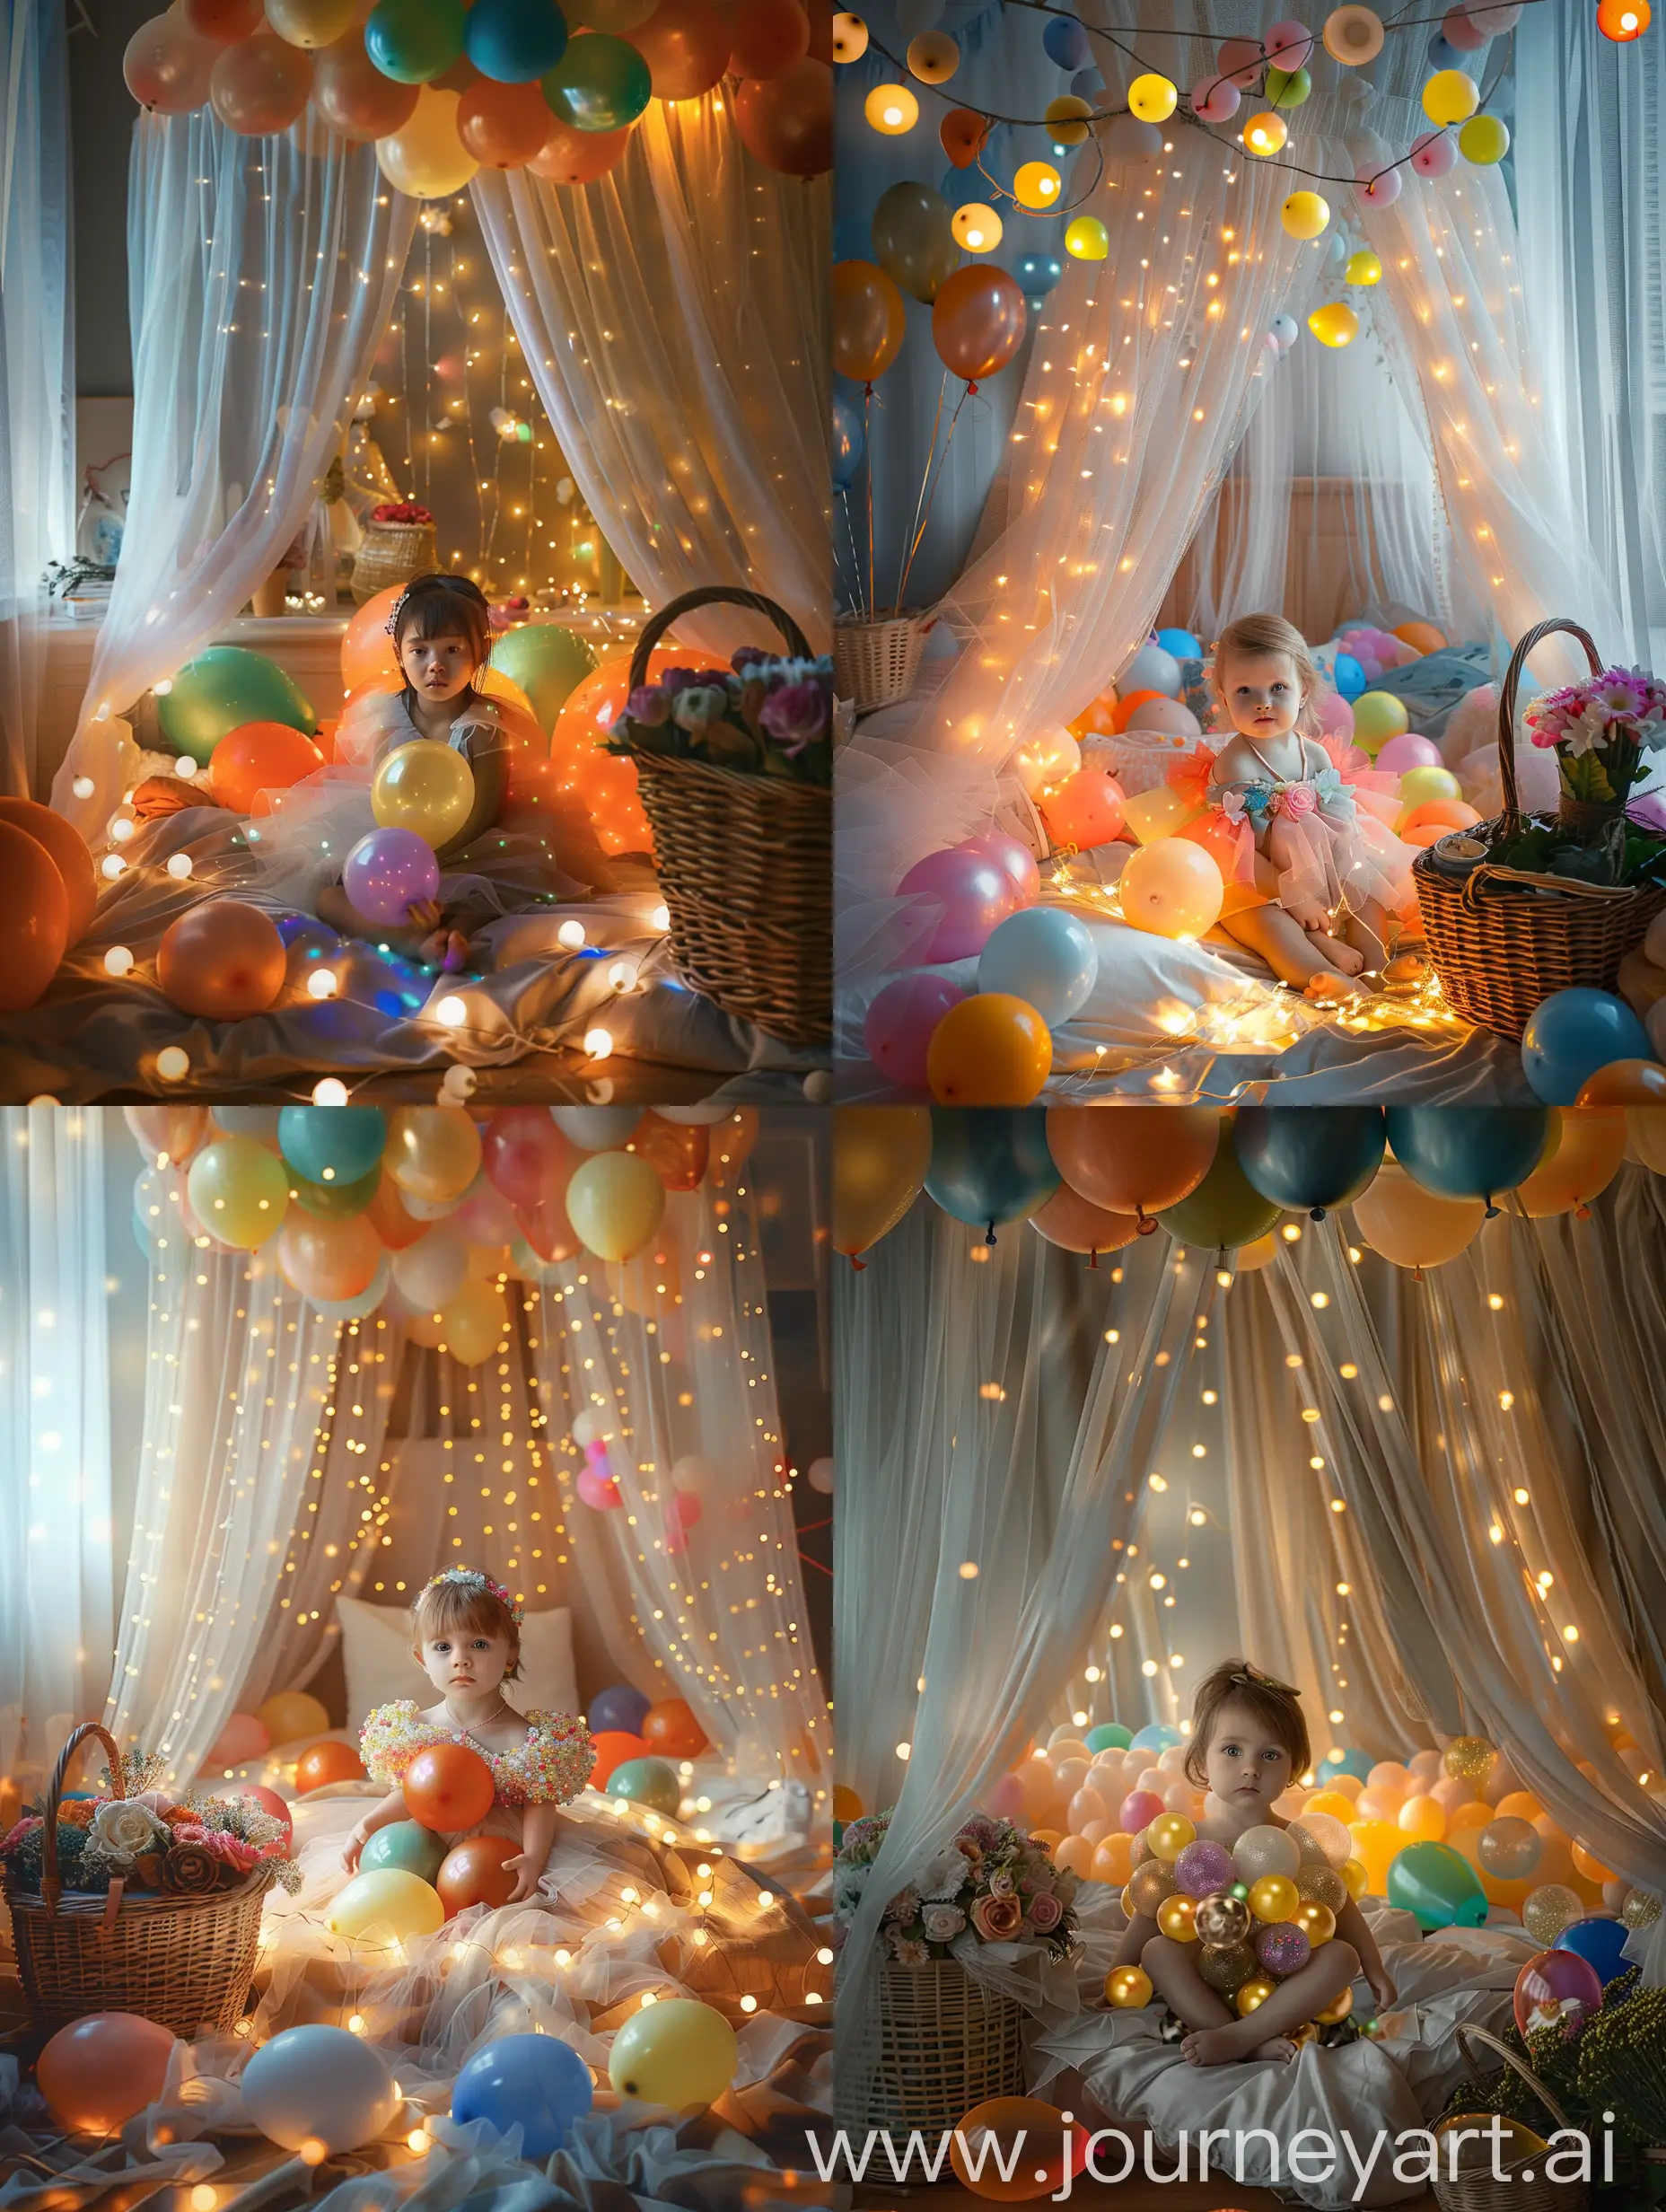 A small child in a balloon dress is sitting on a bed, there are many balloons on the bed, tulle curtains and glowing lights above the bed, the canopy is covered with lights, the face is clearly visible, looking directly into the camera, a basket with flowers and balloons nearby, detail, hyperrealism  close-up, realistic photo 